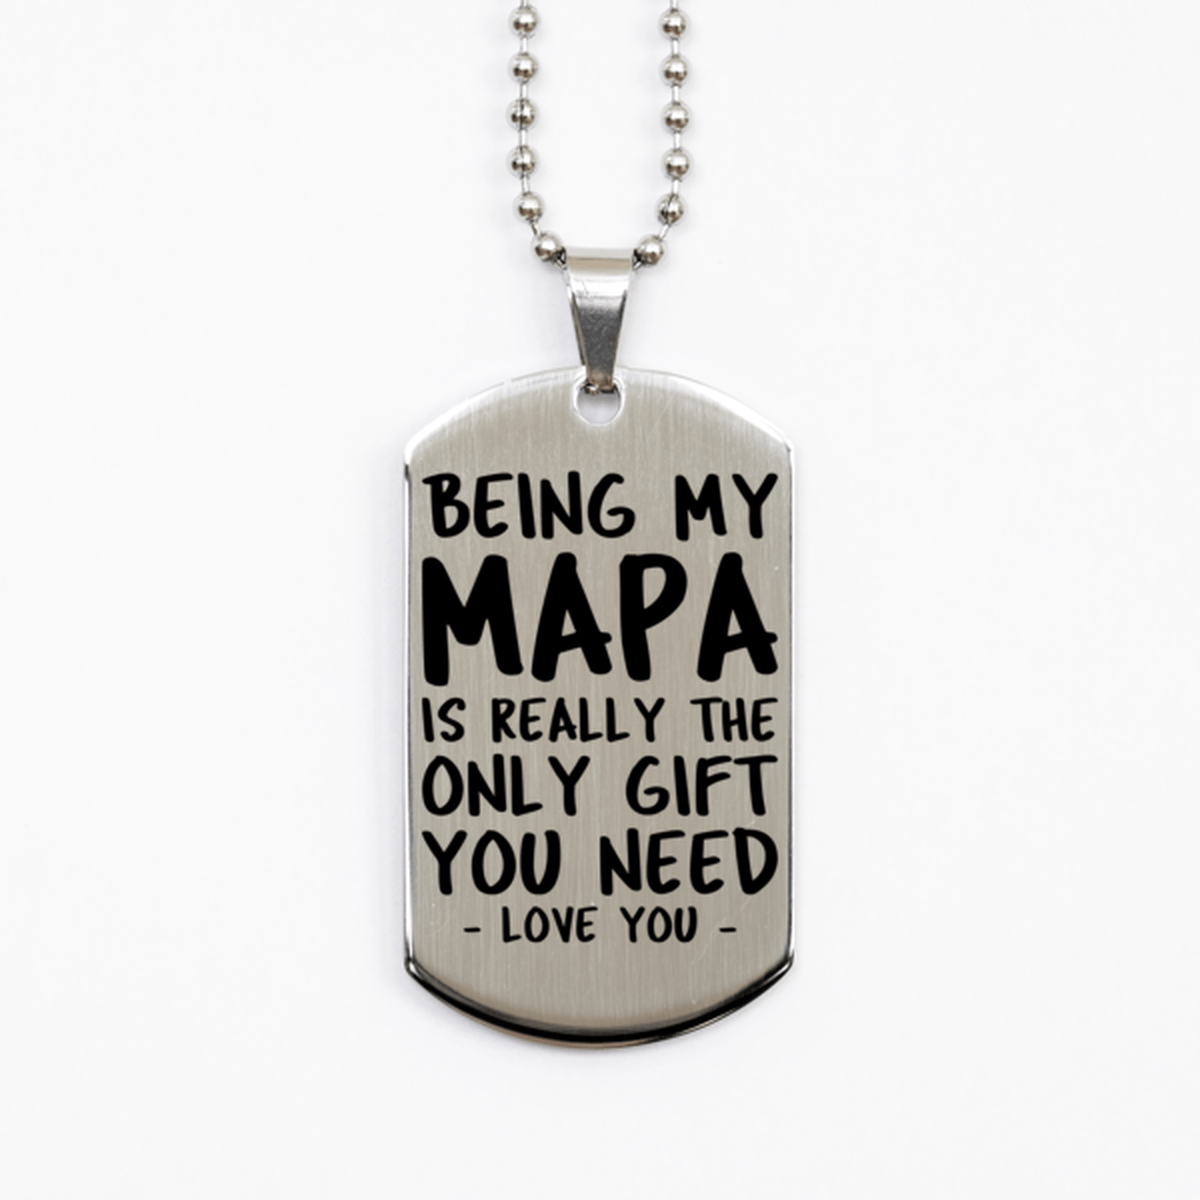 Funny Mapa Silver Dog Tag Necklace, Being My Mapa Is Really the Only Gift You Need, Best Birthday Gifts for Mapa